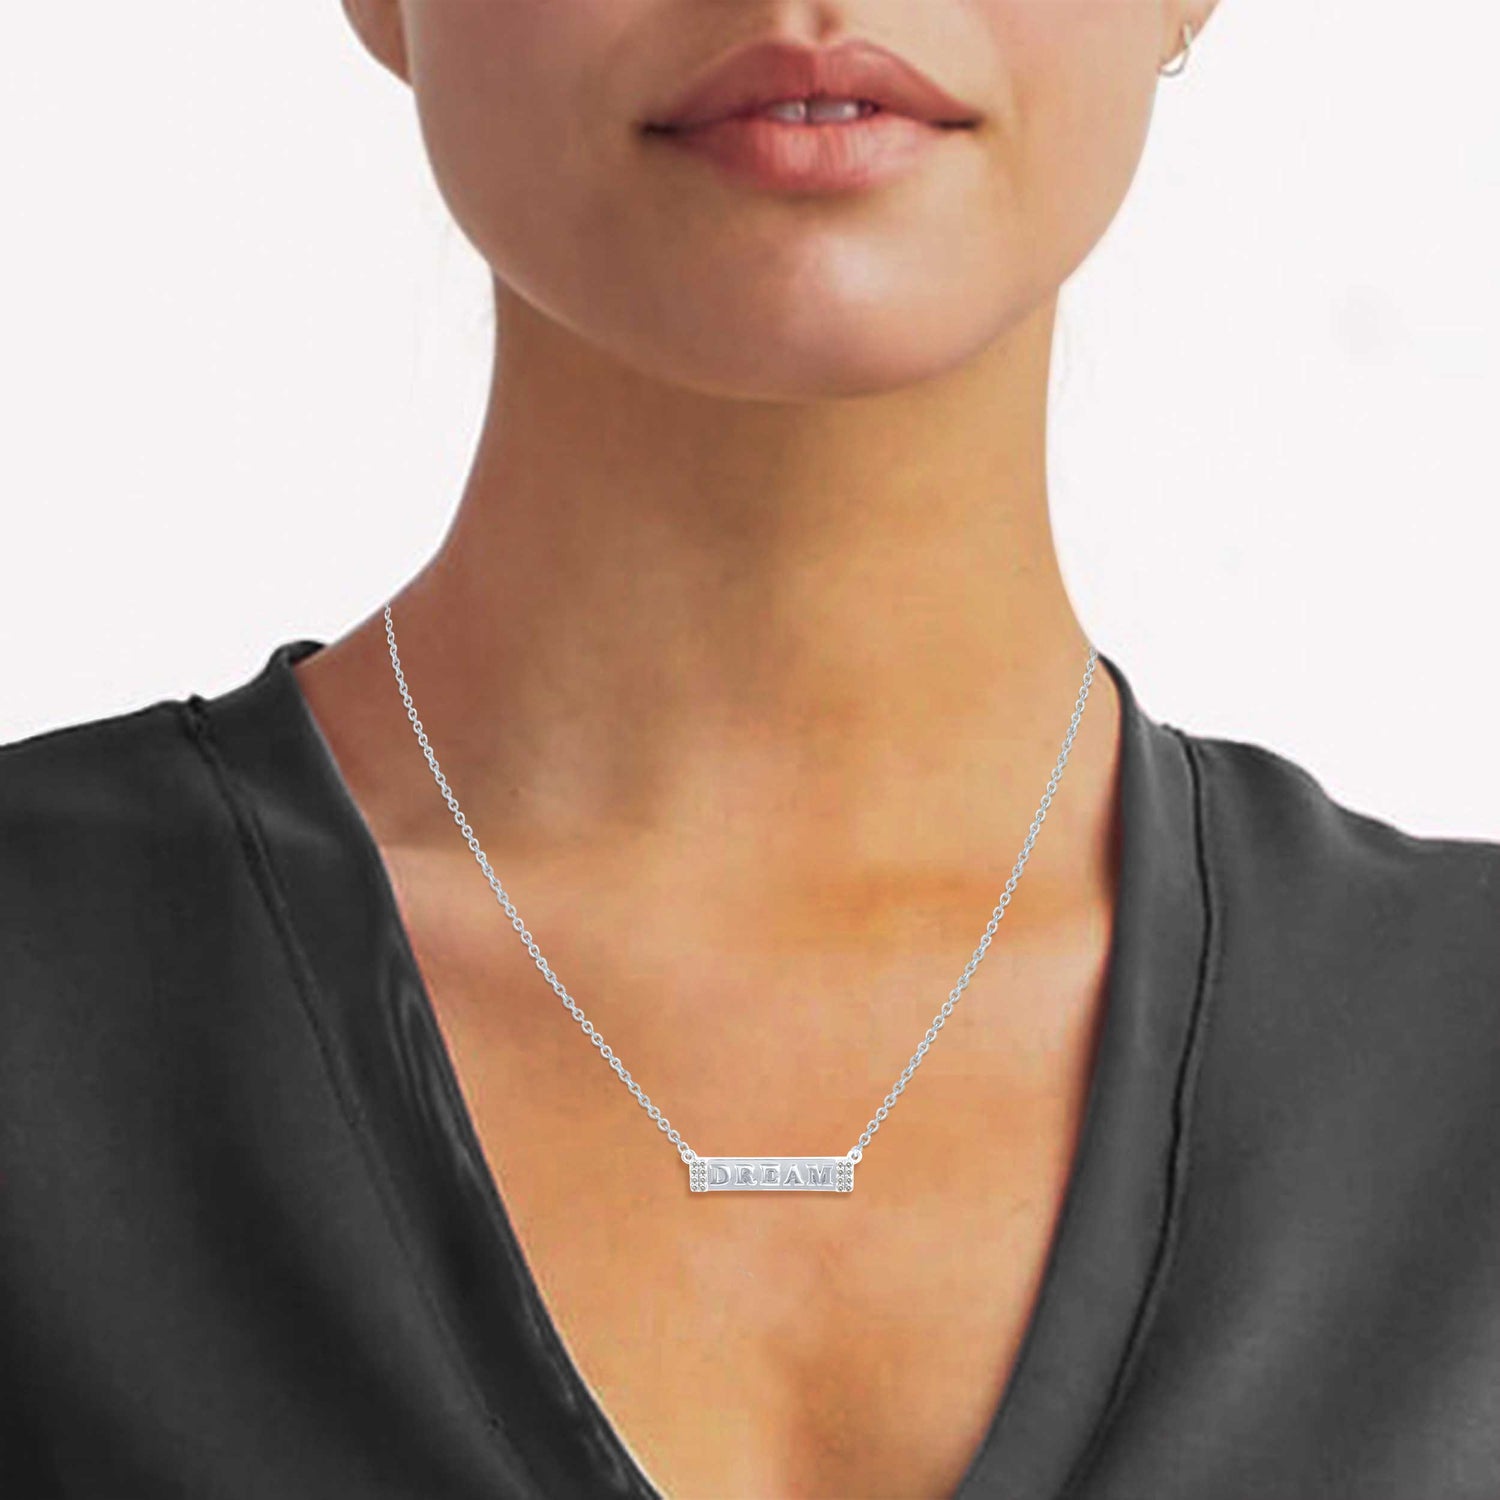 1/5 Cttw Pave Diamond DREAM Bar Pendant Necklace set in 925 Sterling Silver